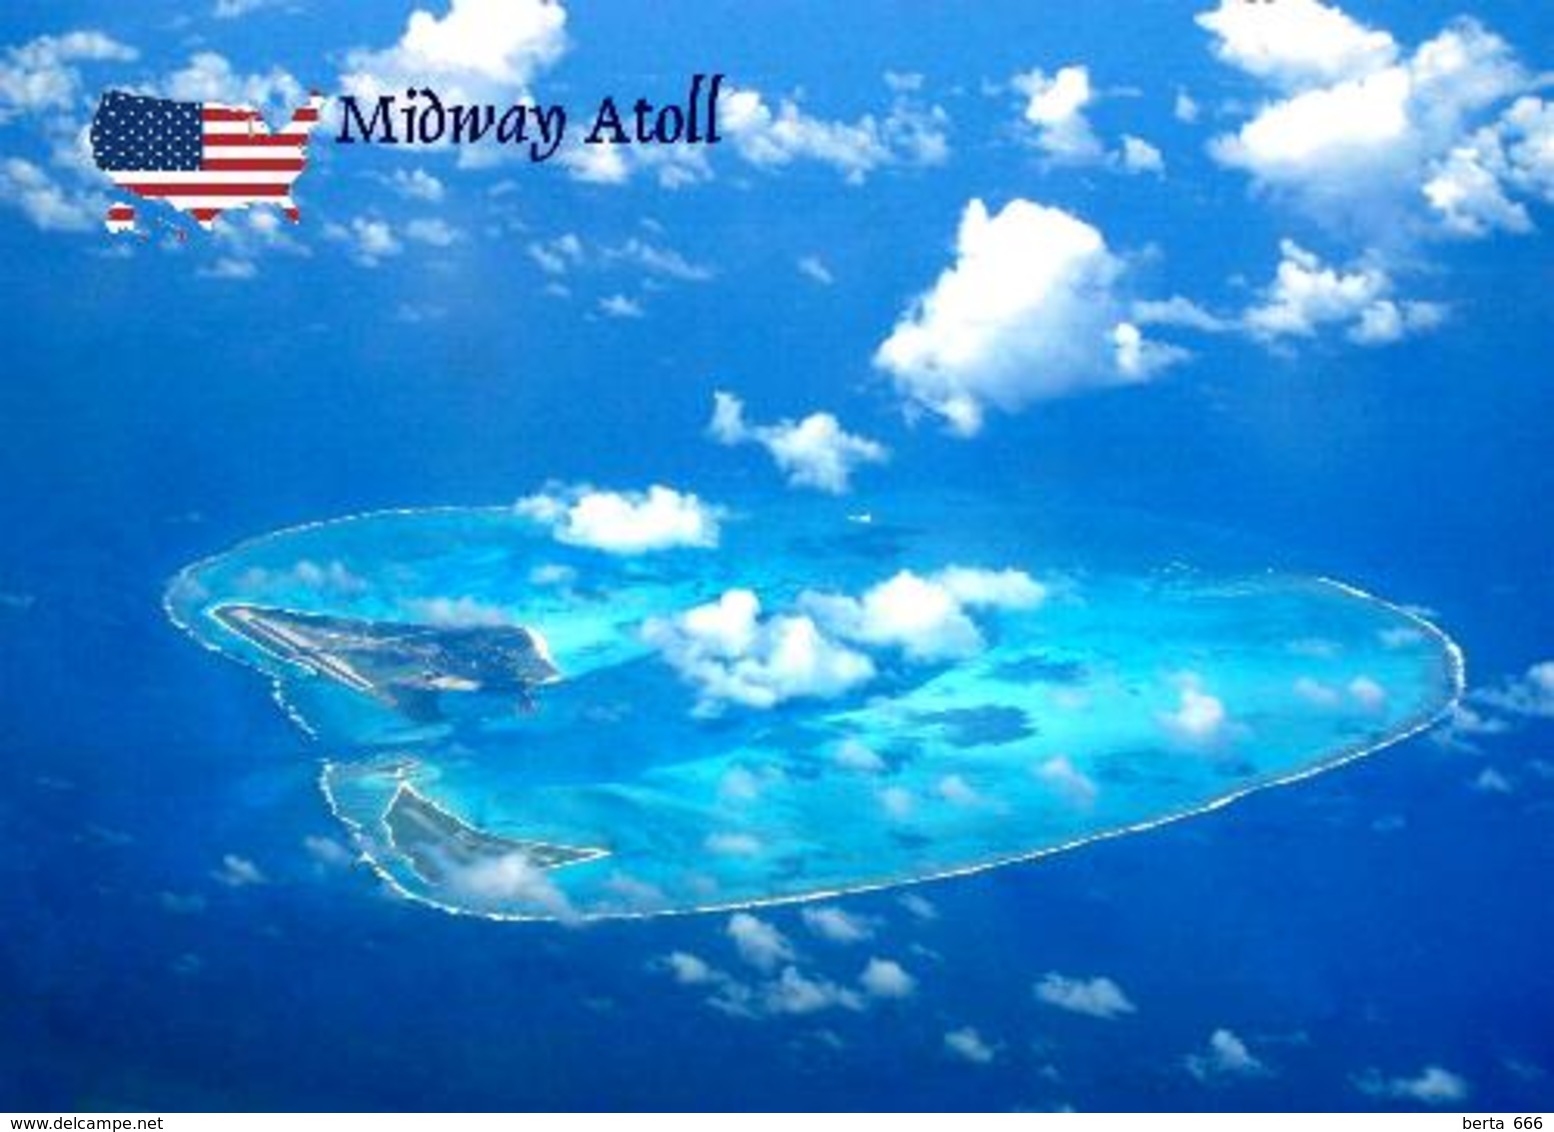 Midway Atoll Aerial View New Postcard - Midway